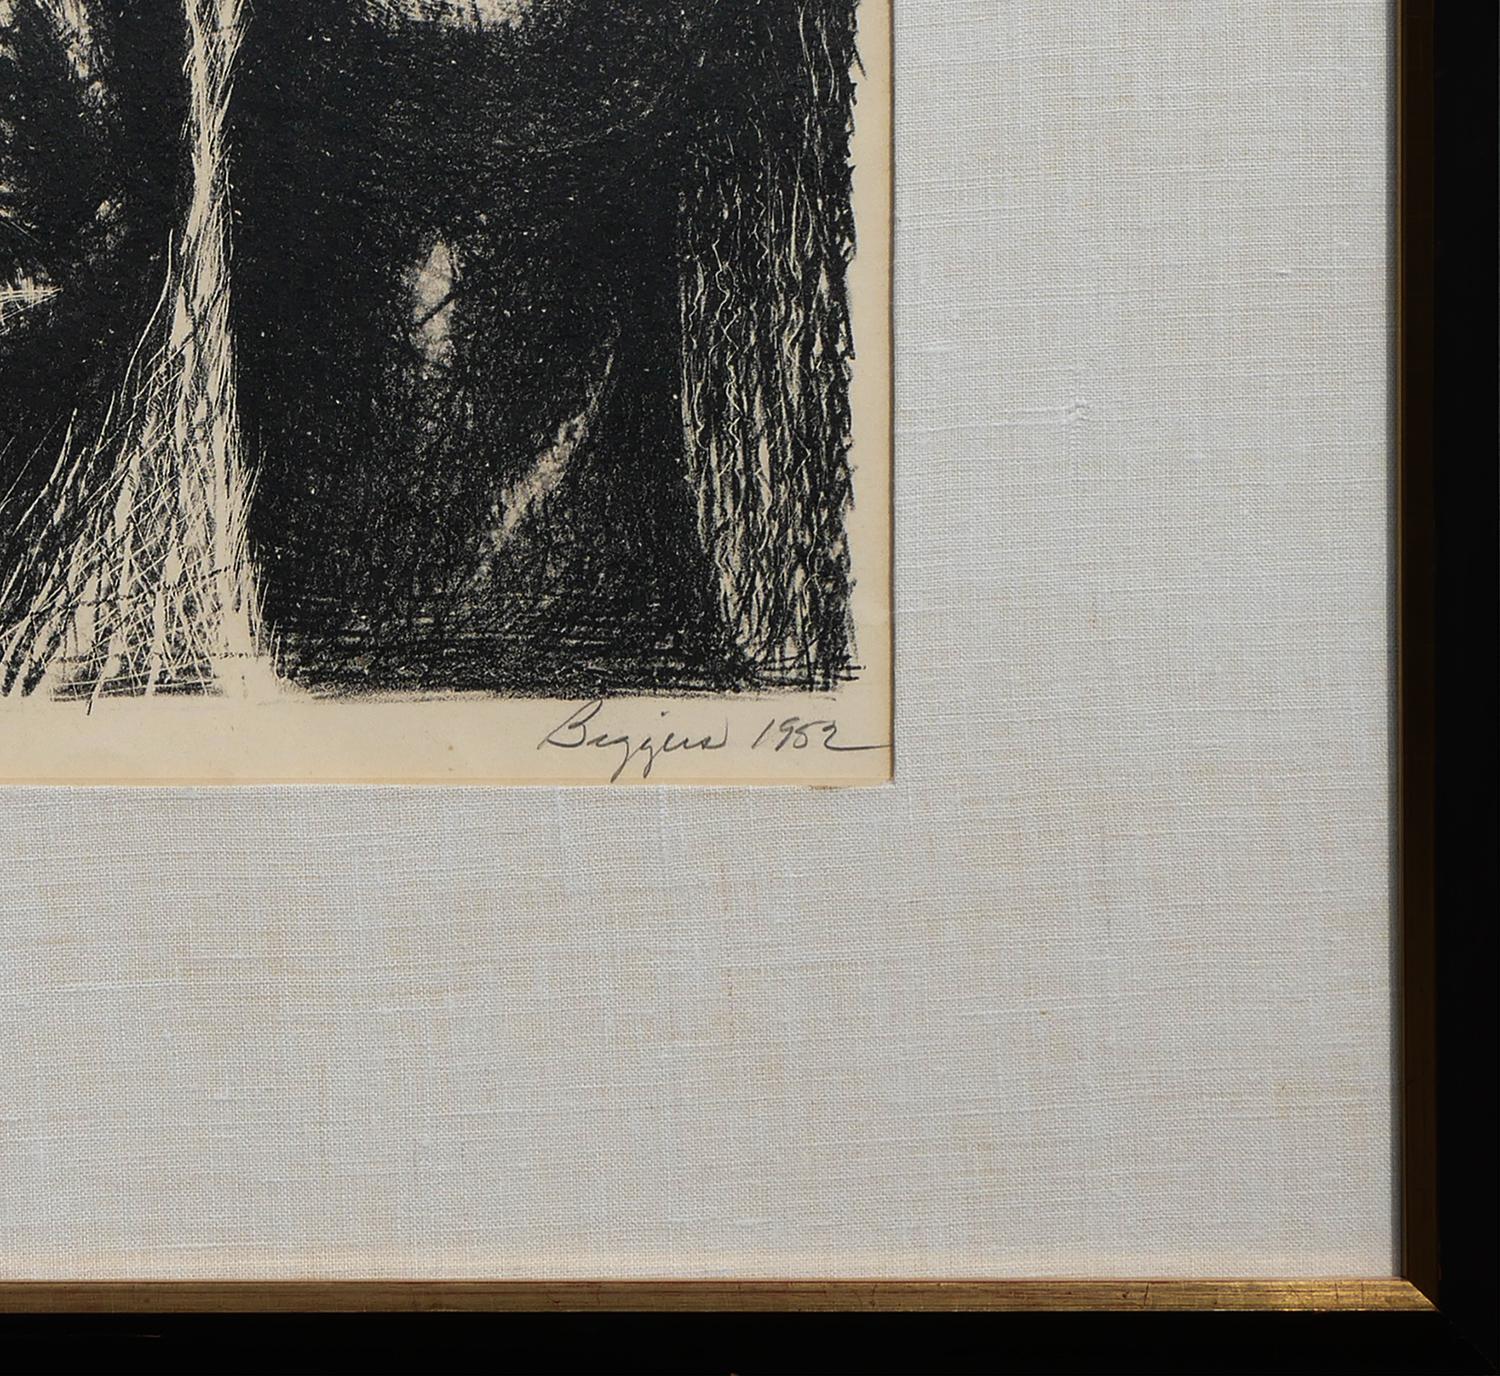 Modern abstract woodcut by renowned artist John Biggers. The work features a close up black and white image of a pair of  abstracted figures. Signed, titled, and dated along front lower margin. Currently hung in a black frame with a white